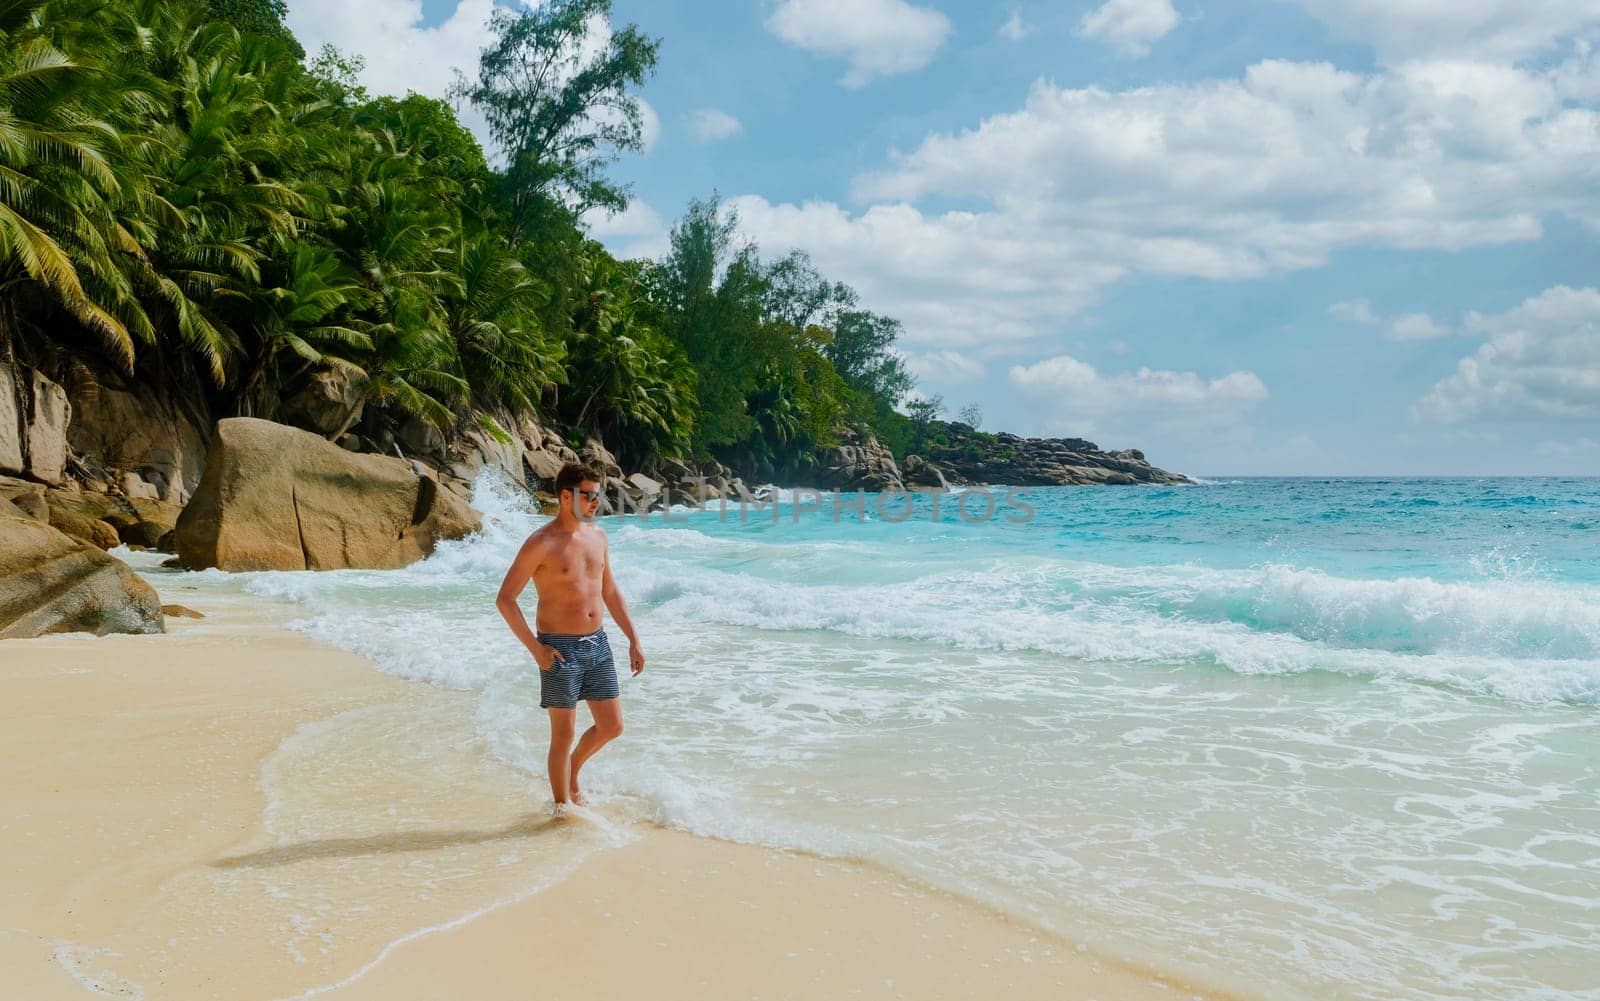 Young men in swimshort on a white tropical beach with palm trees Petite Anse beach Mahe Seychelles by fokkebok